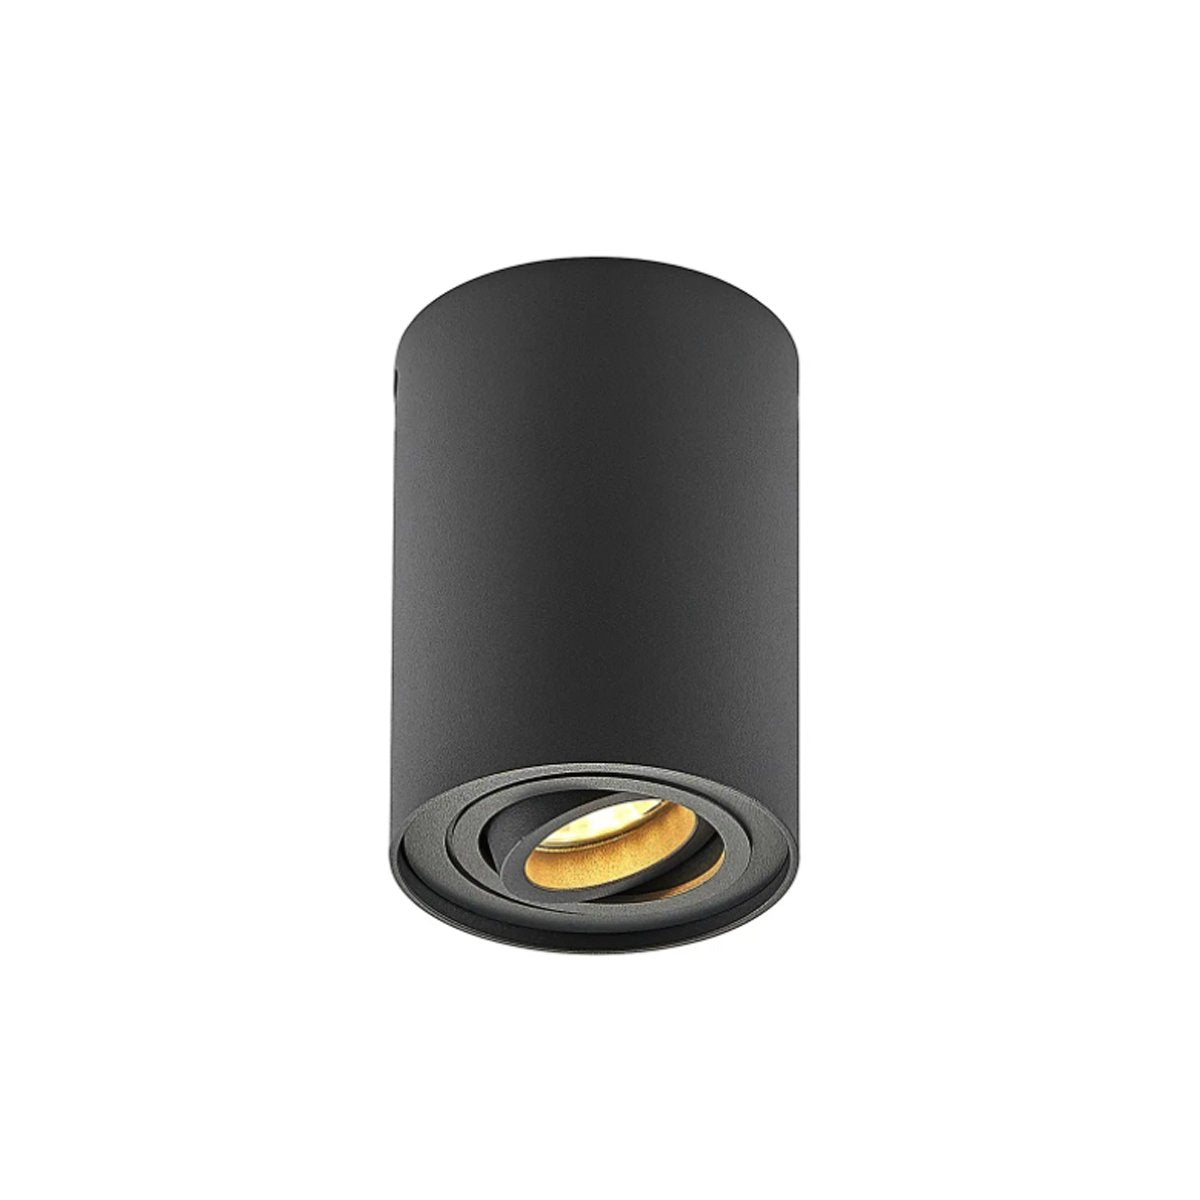 We combine practicality with atmosphere, the result is the Sasha series. These universal spots can be used wherever you would like. The sleek design will feel like a fits perfectly with all interiors.  Rotating by 360 degrees and complete with a tilted function its allows you to get the desired light output exactly where you want the light to beam. These lights are made from a high quality aluminum and powder coated to an immaculate black finis